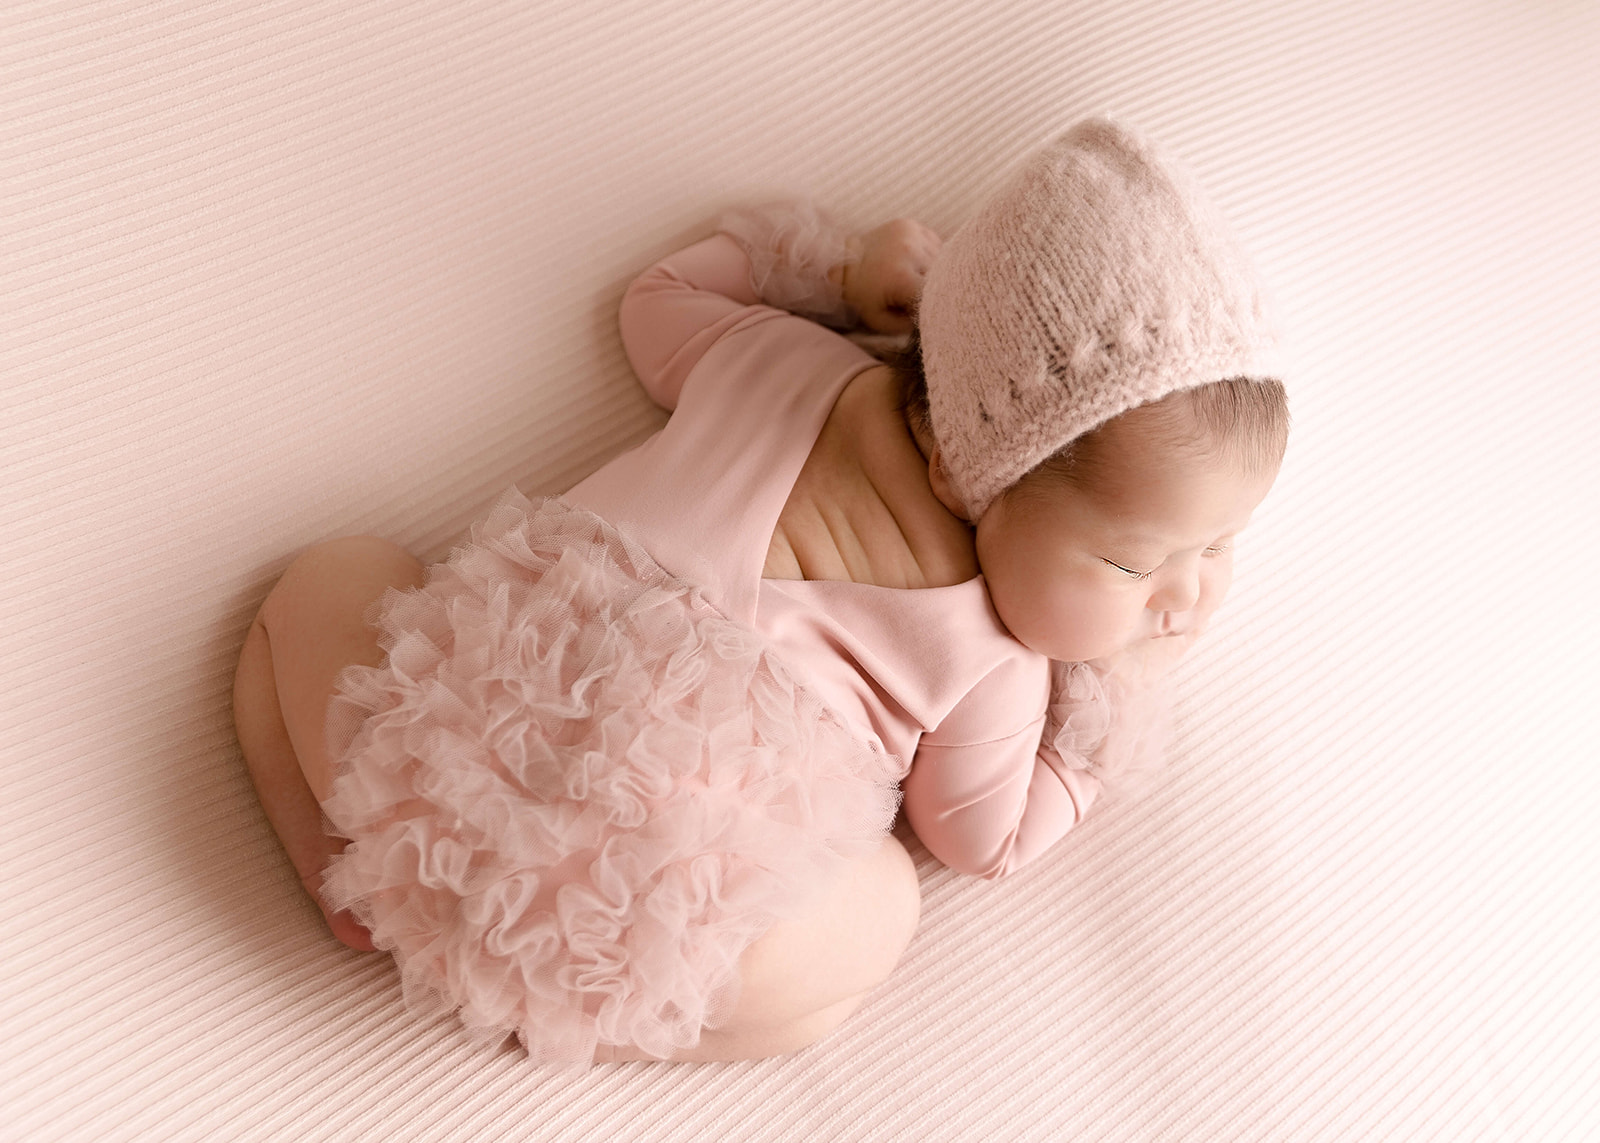 A newborn baby sleep in a froggy pose whiile wearing a pink tule onesie Los Angeles Midwives